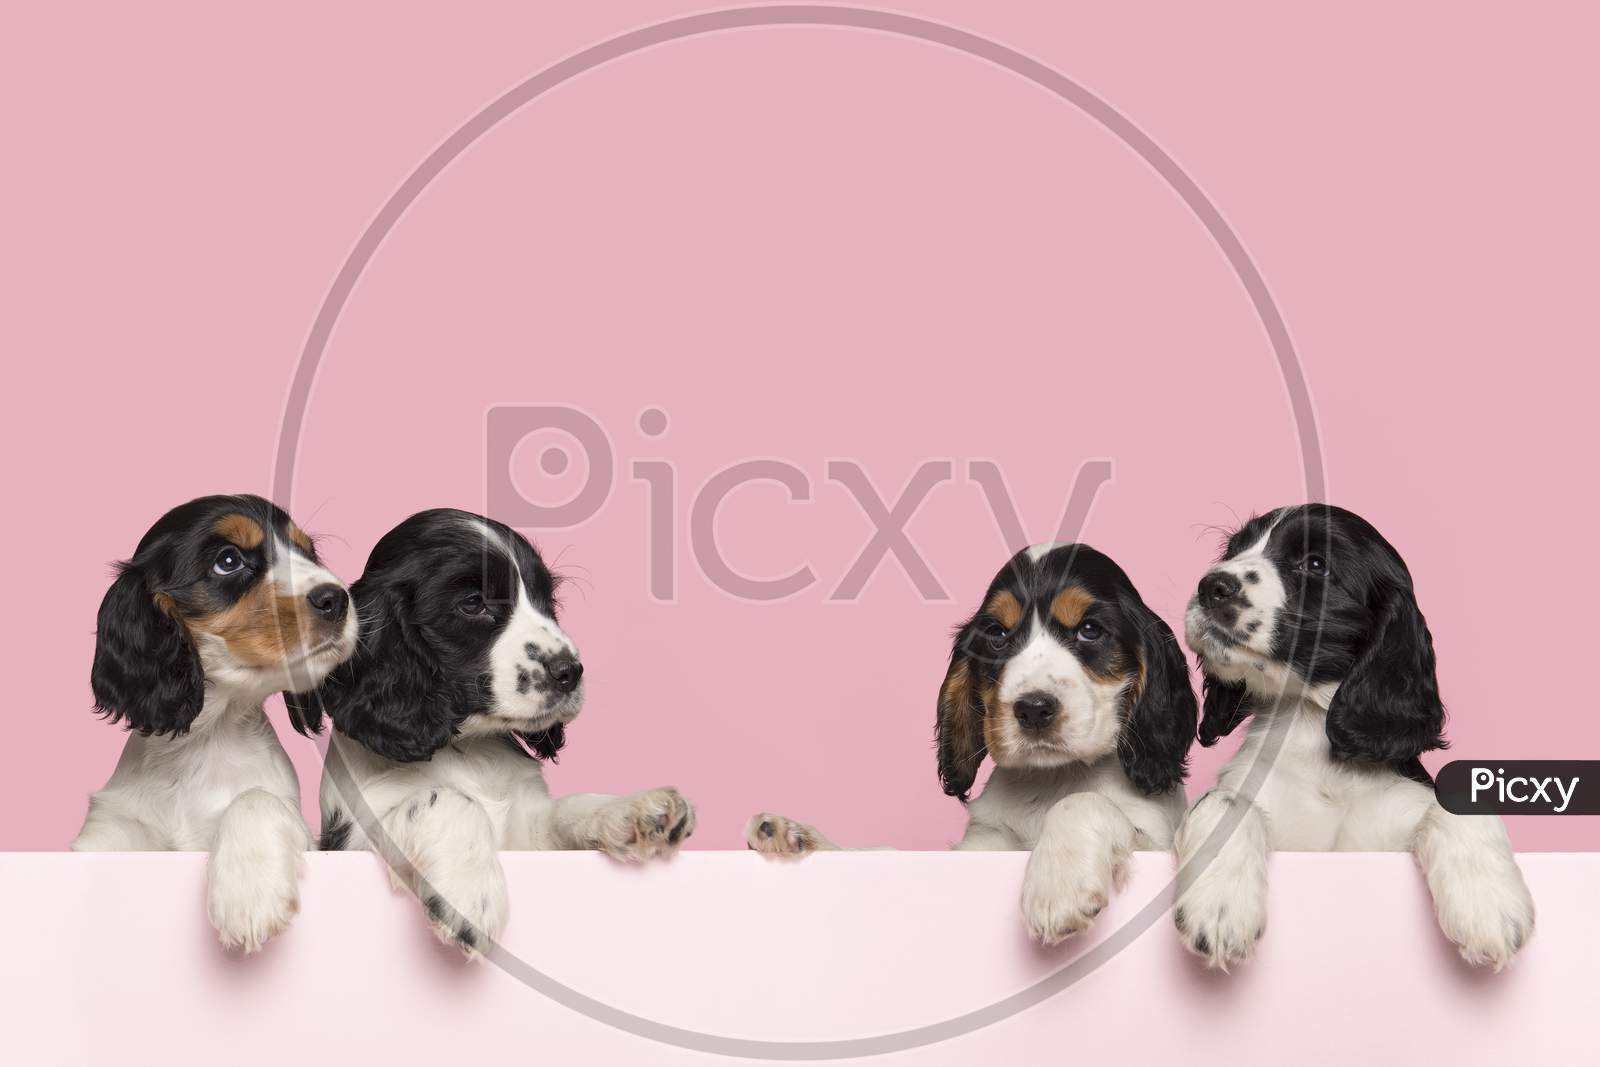 Four Cute Cocker Spaniel Puppies Hanging Over The Border Of A Pastel Pink Box On A Pink Background With Space For Copy